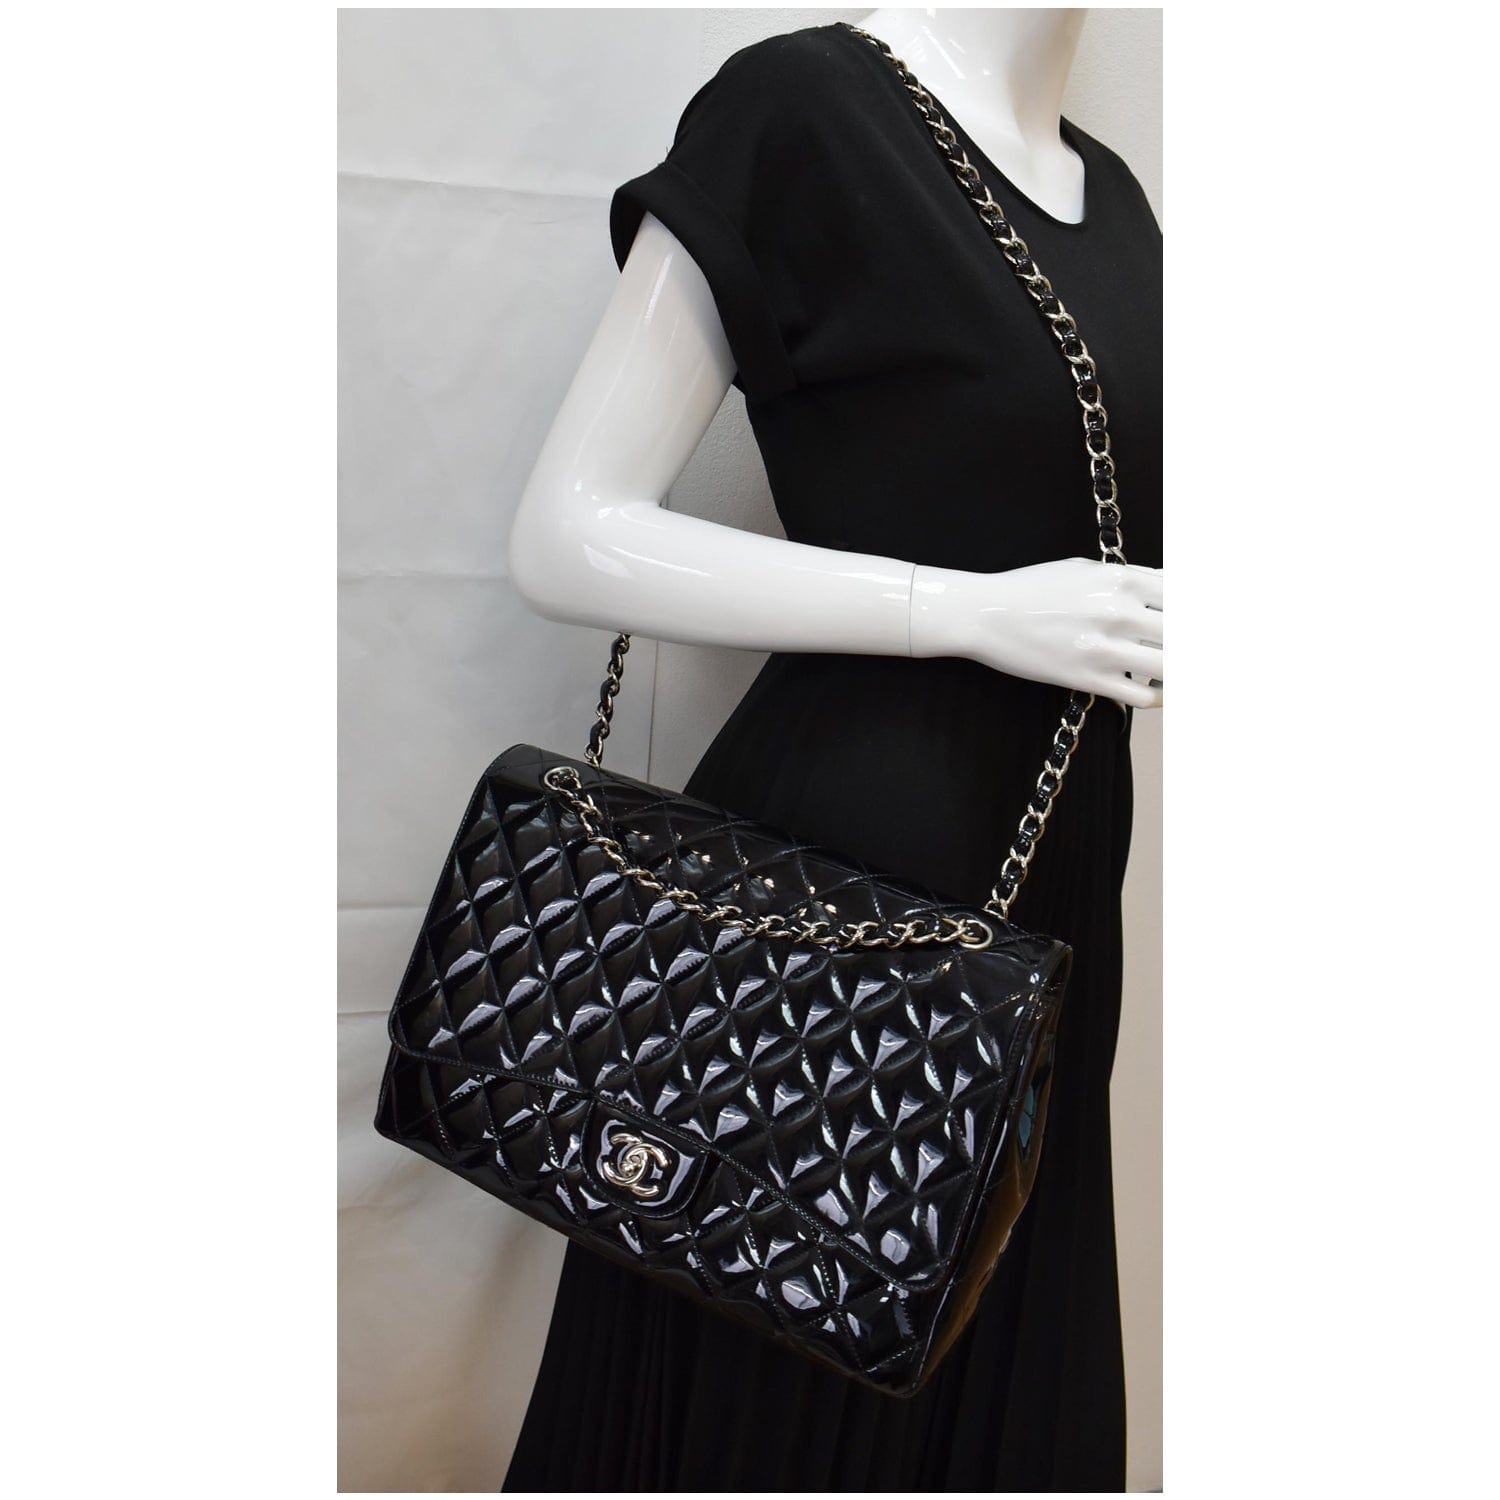 Chanel Timeless Classic Maxi Single Flap Bag in Black Caviar with Silver  Hardware - SOLD